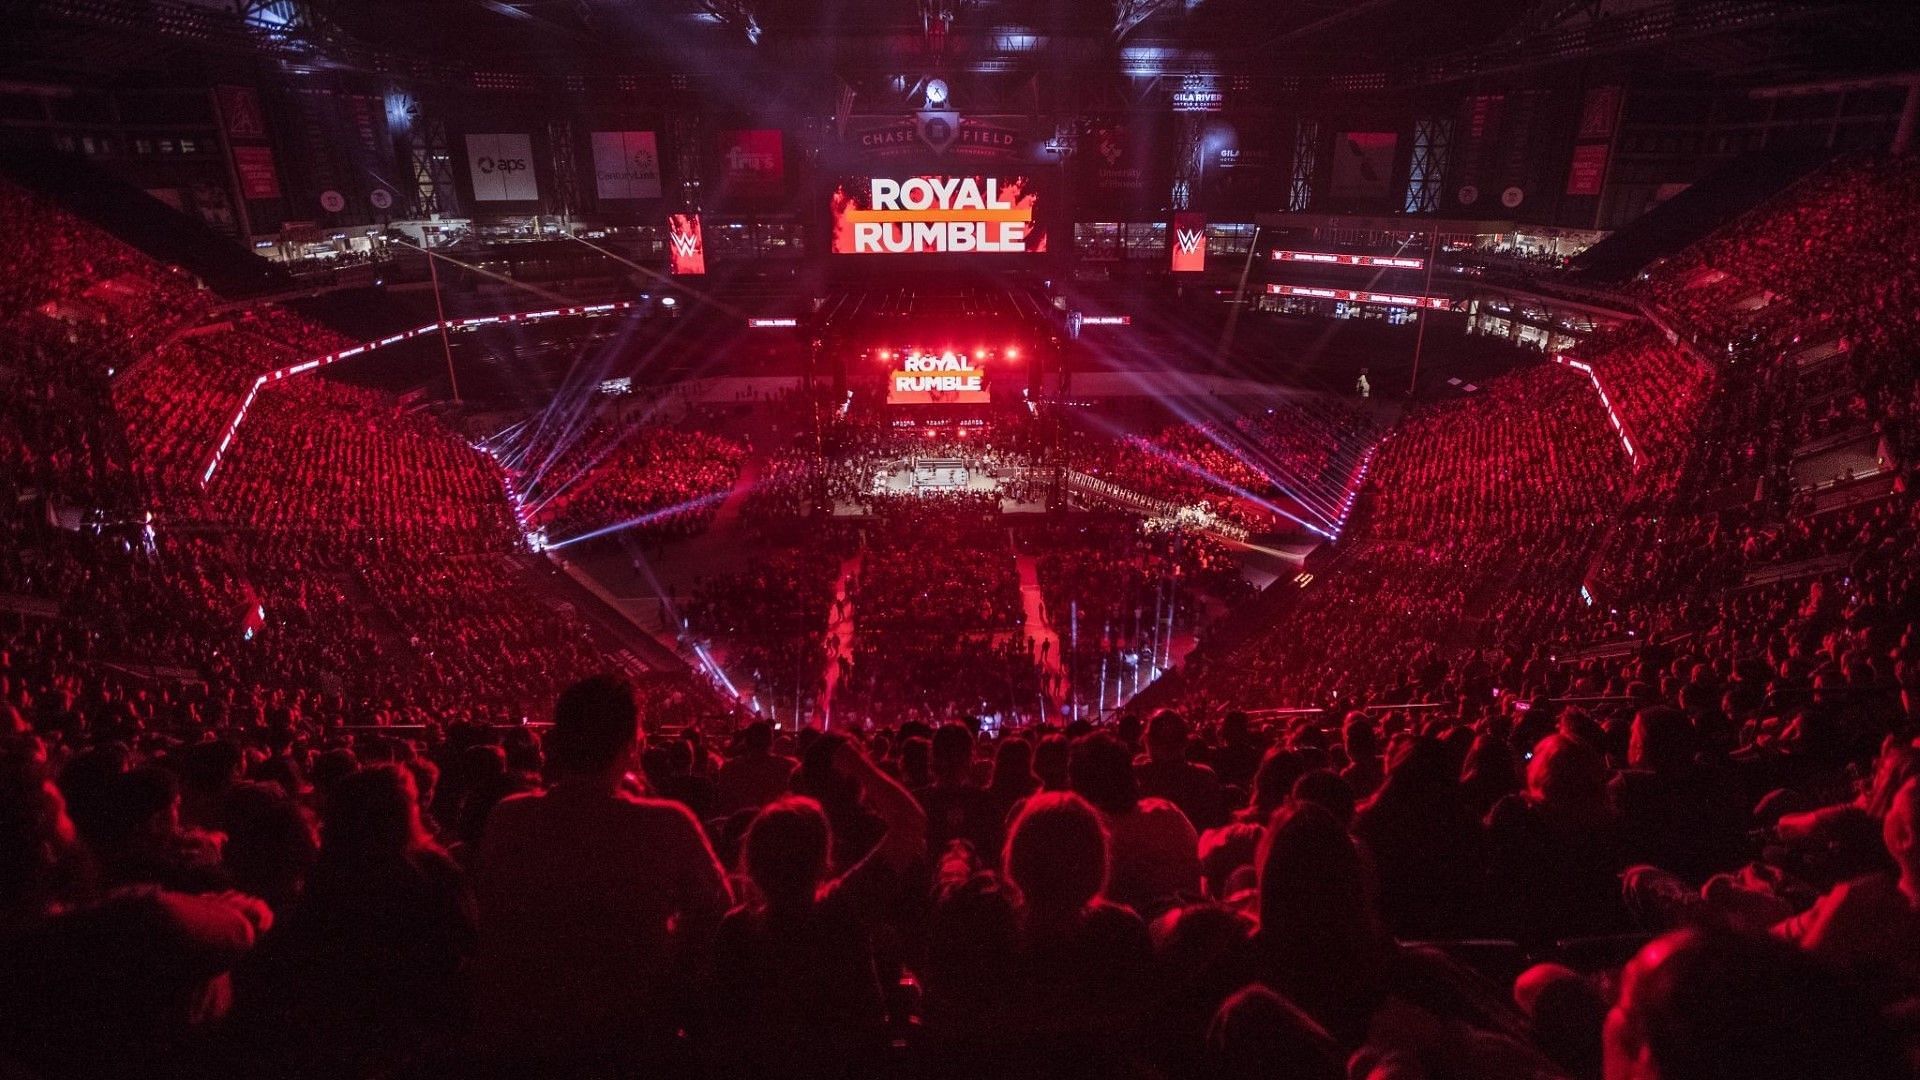 A packed crowd in attendance for the WWE Royal Rumble